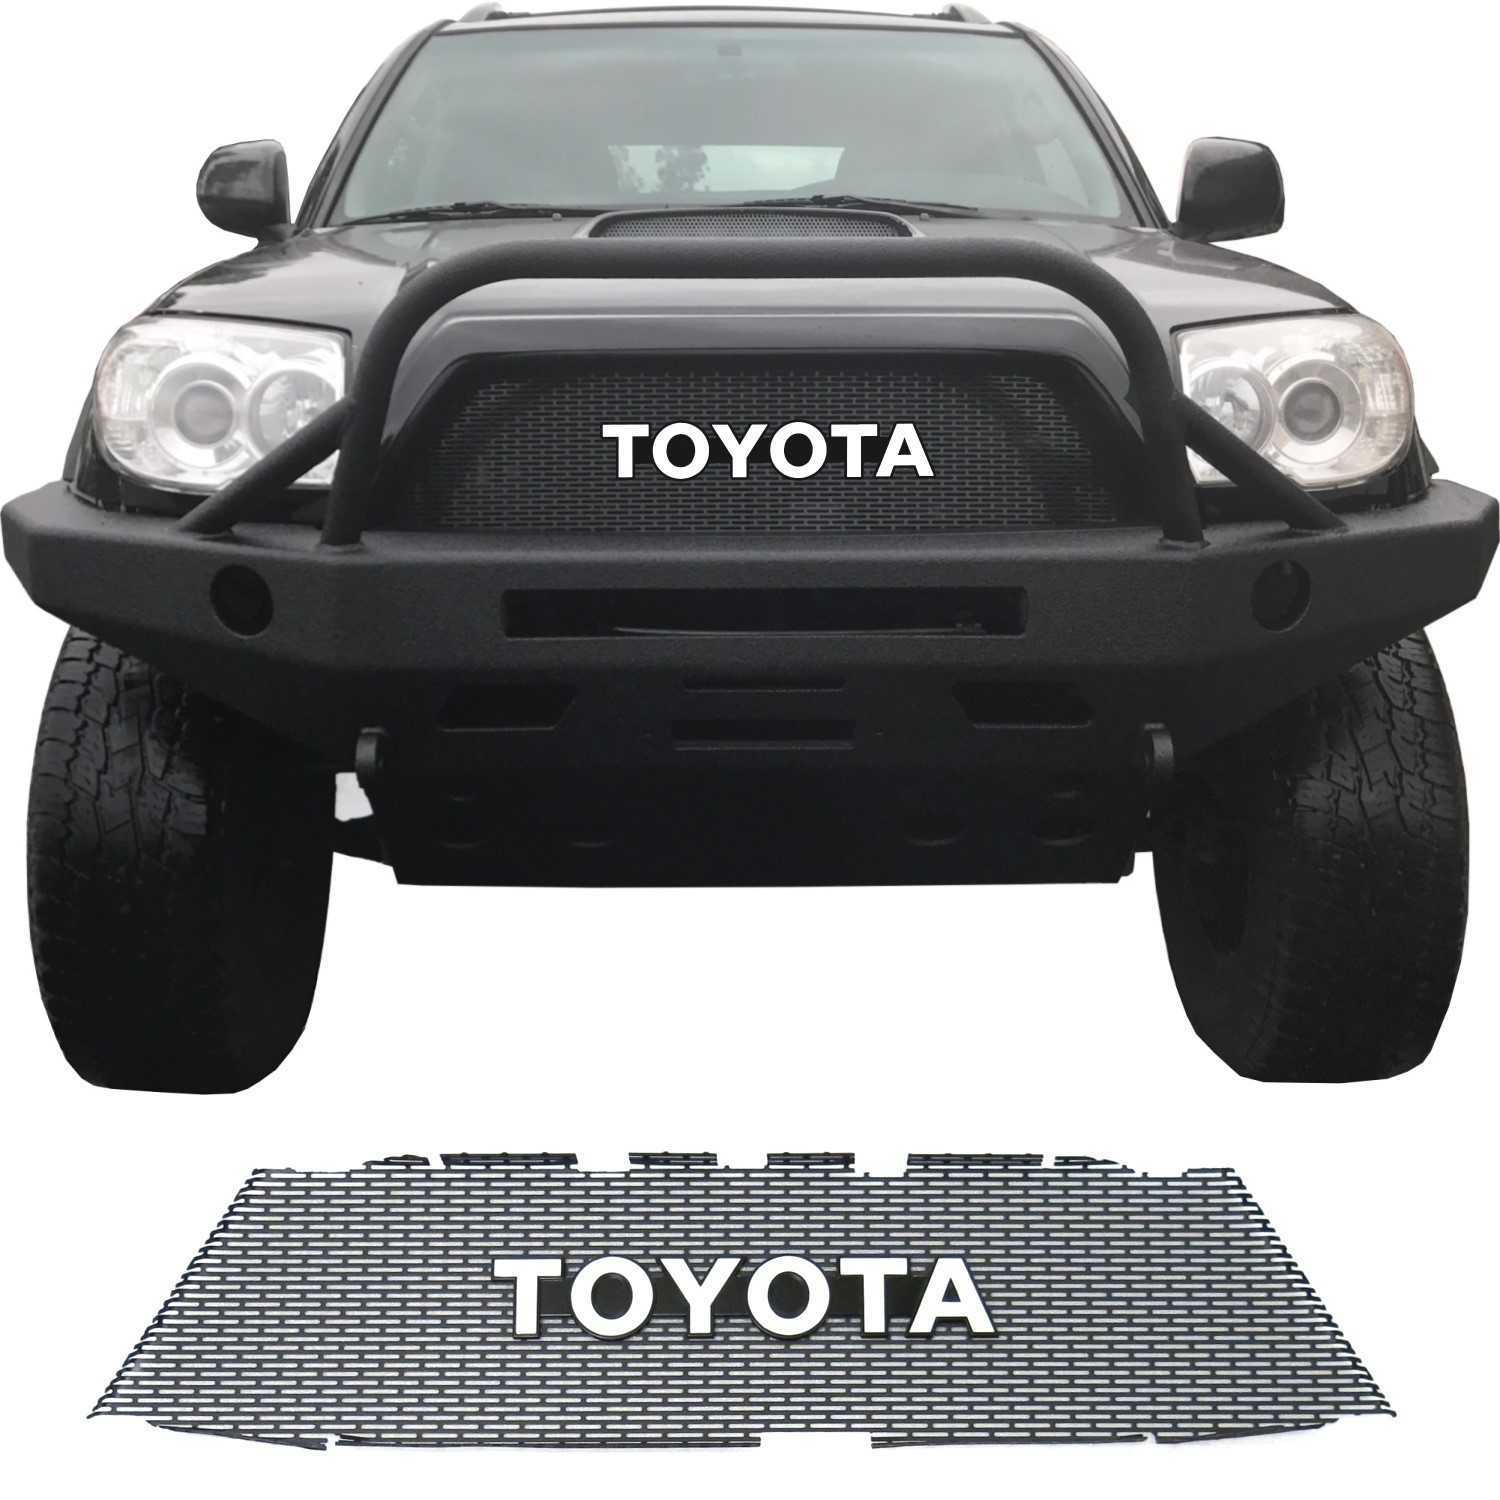 2006 - 2009 Toyota 4Runner Grill Mesh with Toyota Emblem